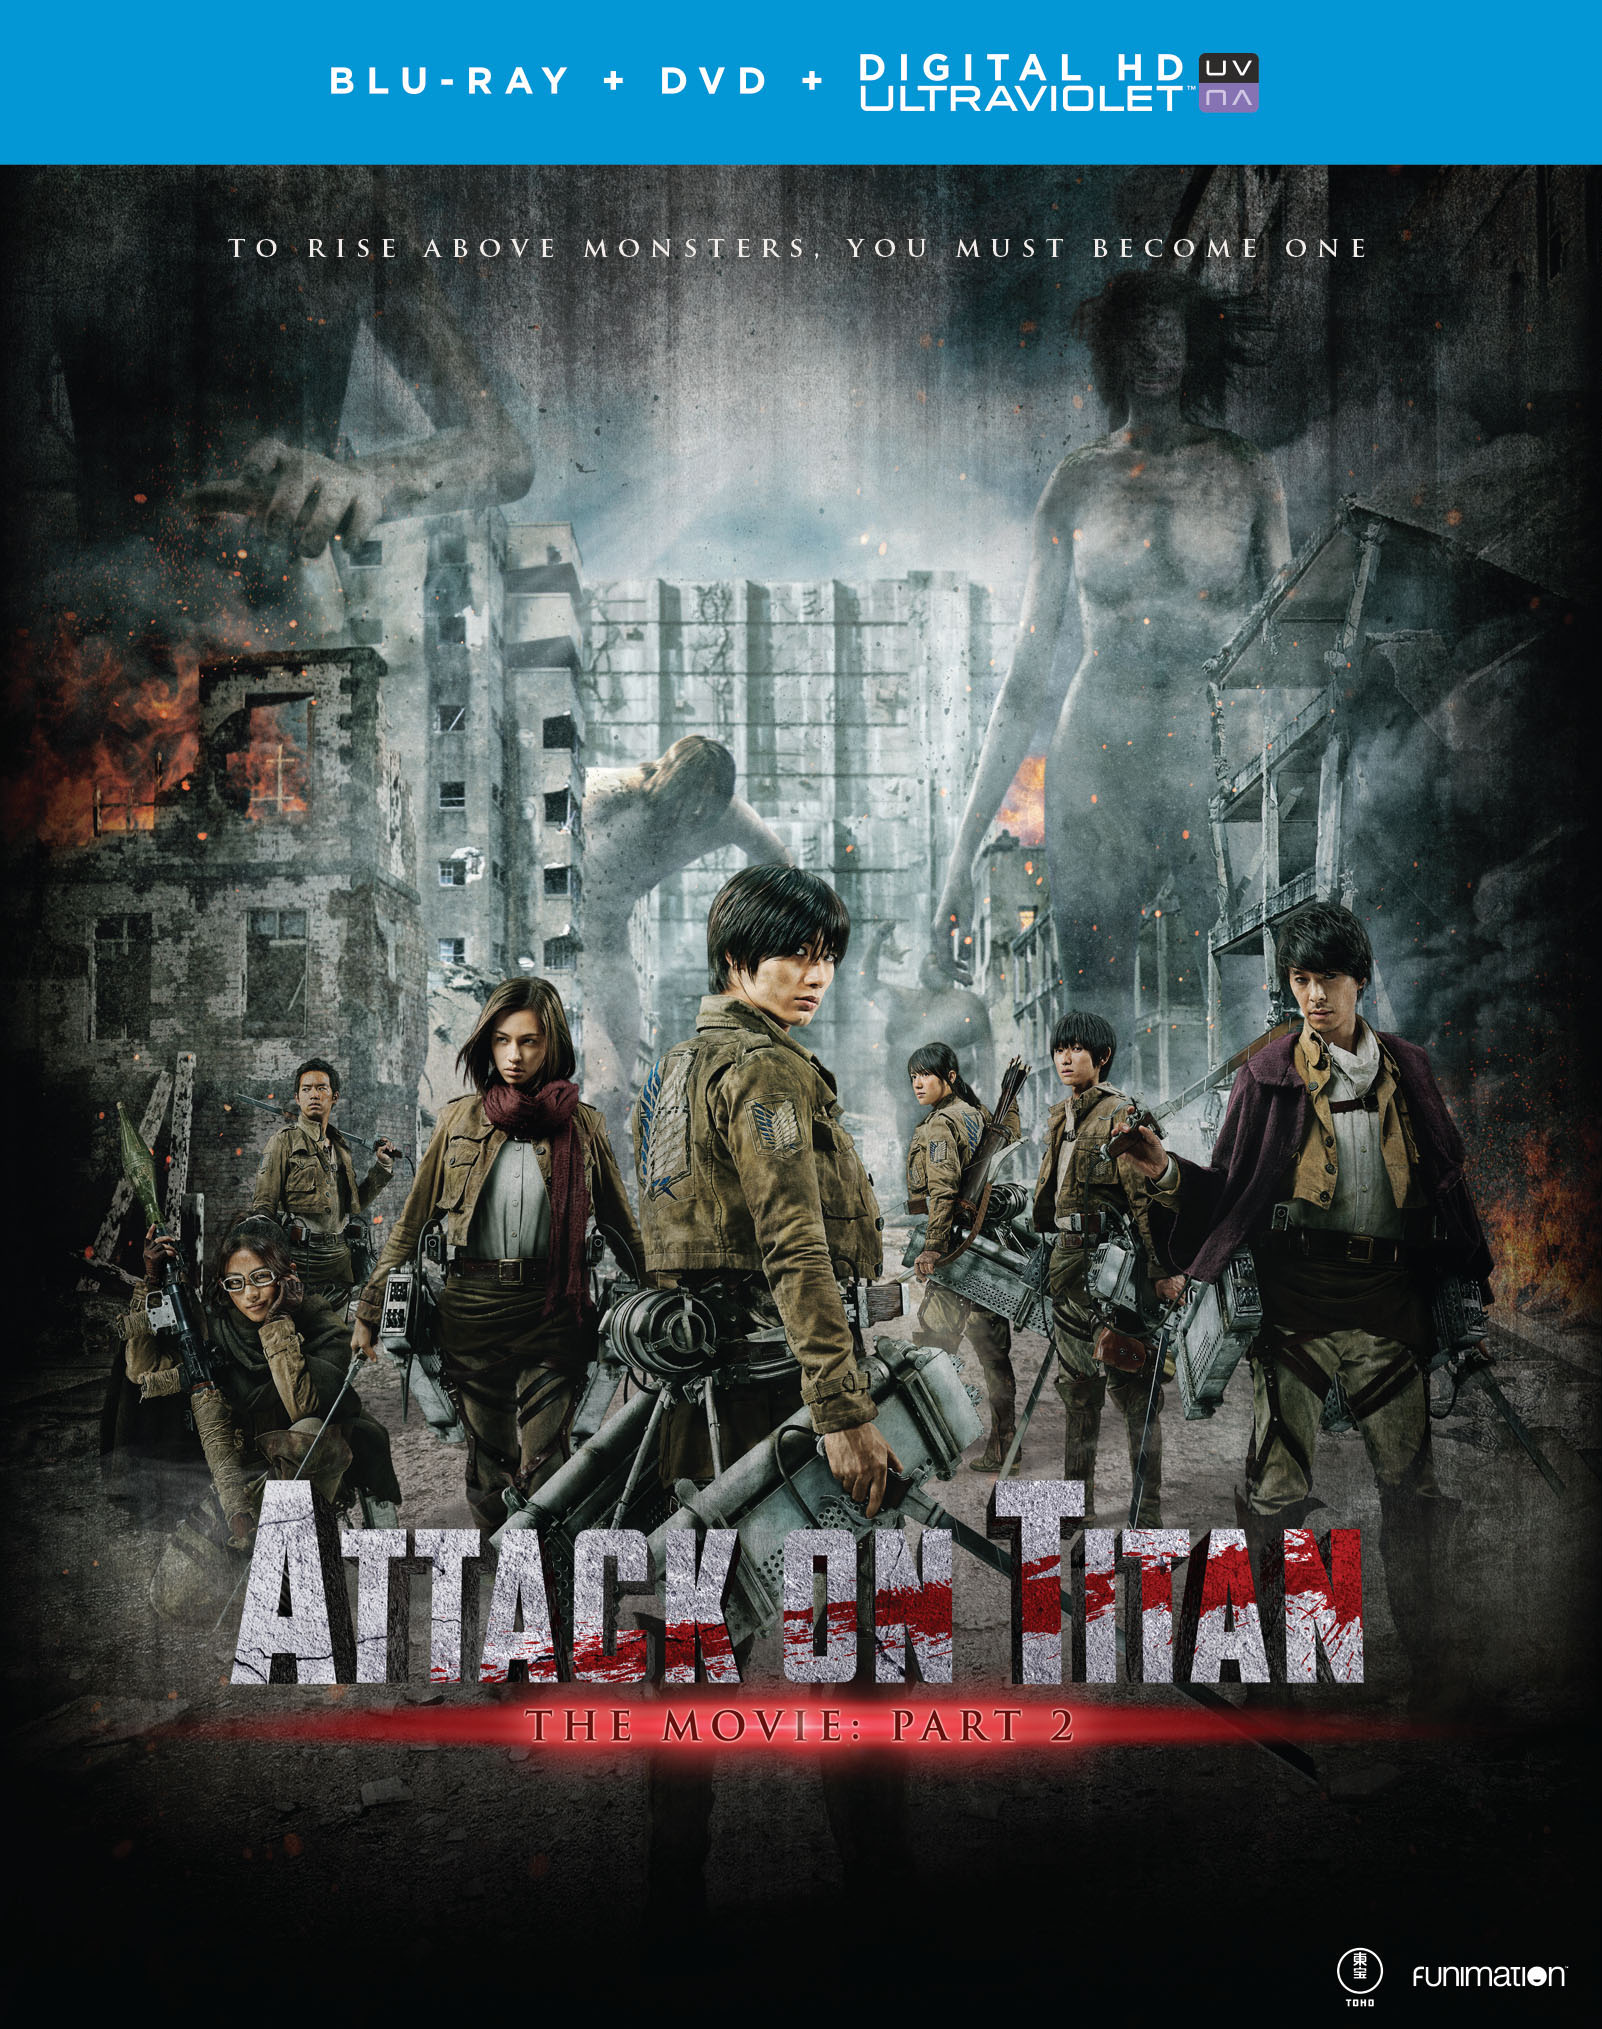 Attack on Titan The Movie - Part 2 - Blu-ray + DVD + UV image count 0